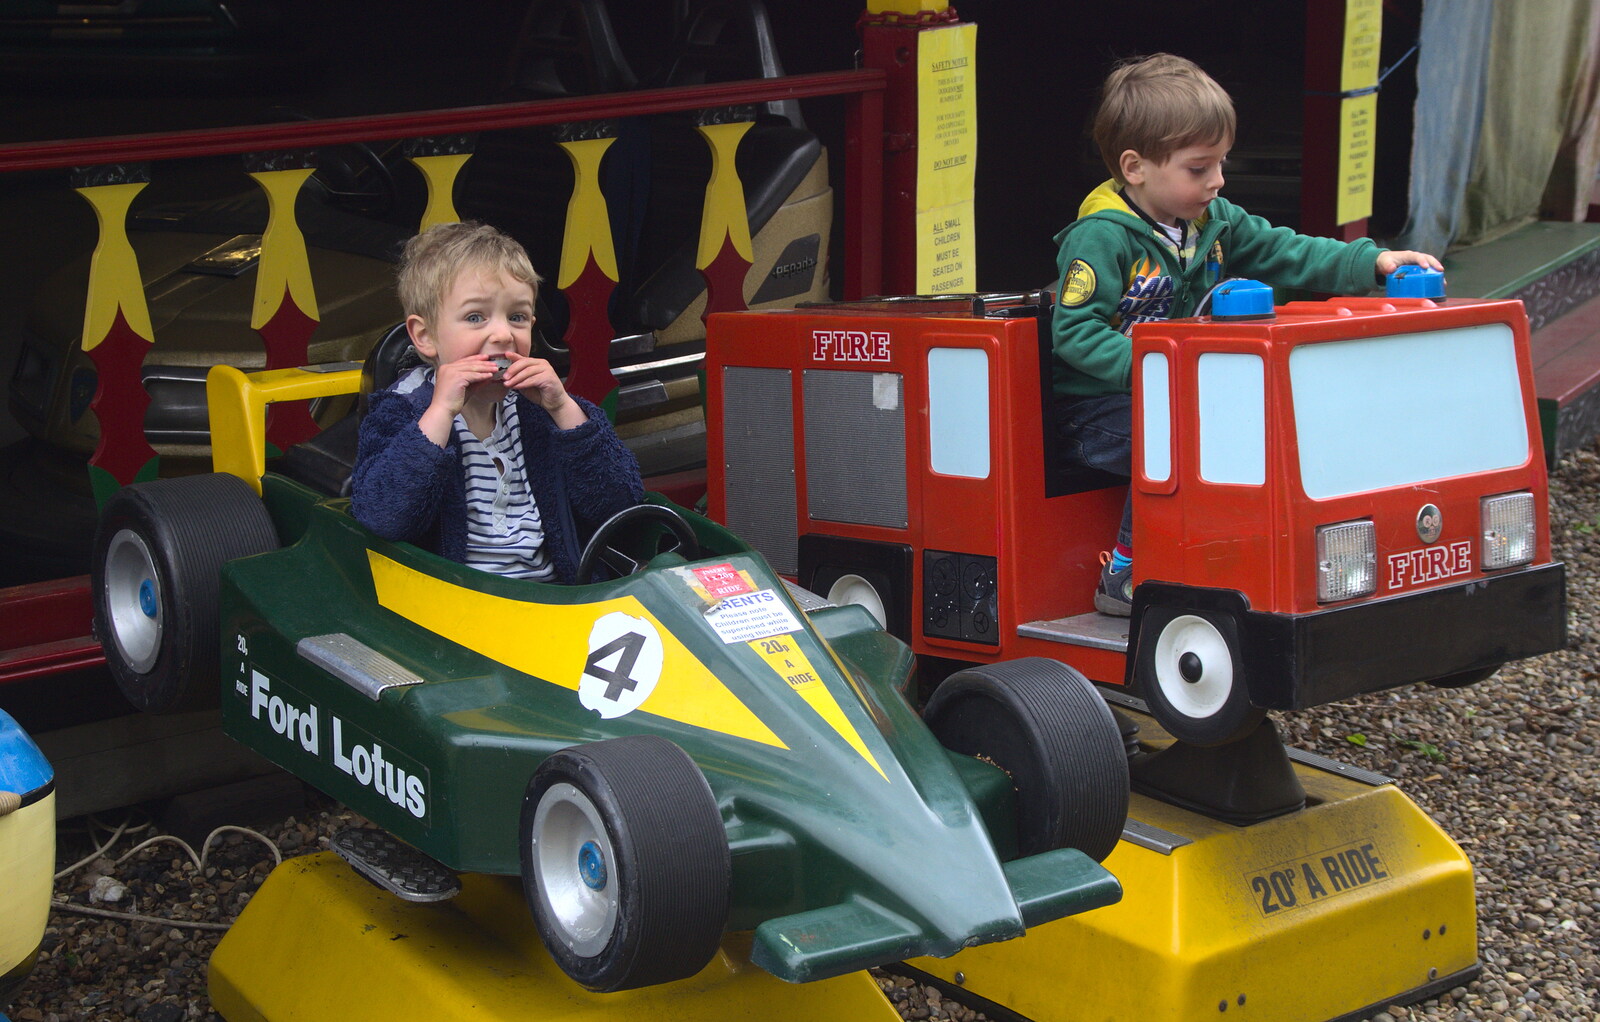 The boys mess around on some rides from A Day at Bressingham Steam and Gardens, Diss, Norfolk - 18th May 2013